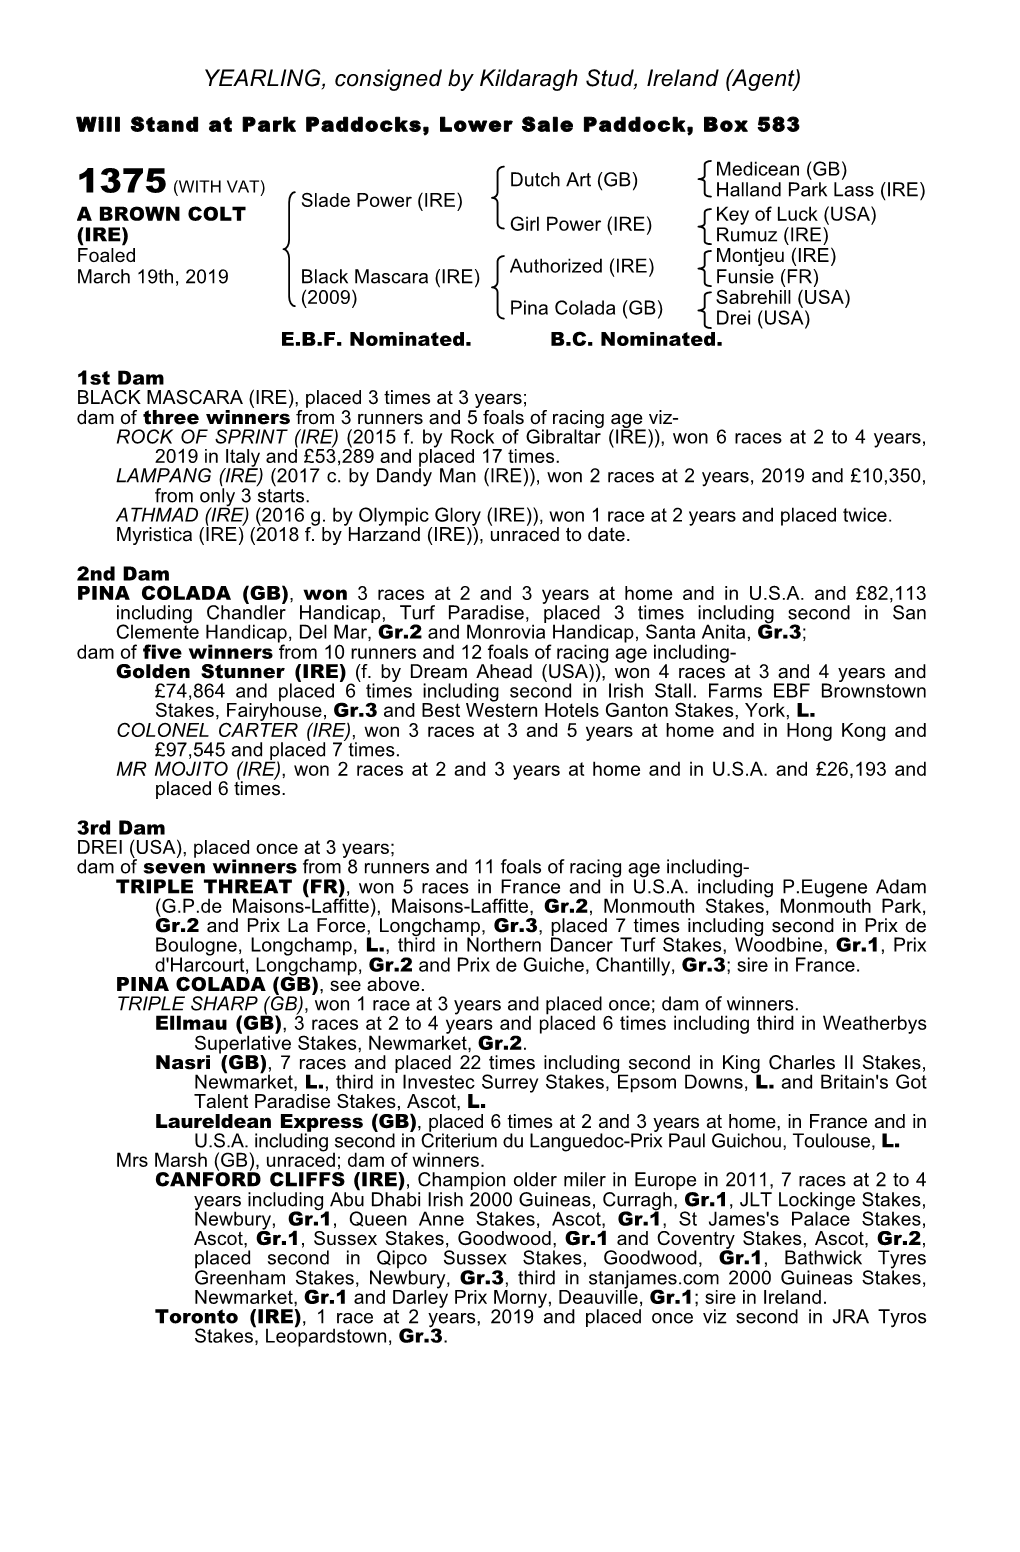 YEARLING, Consigned by Kildaragh Stud, Ireland (Agent)